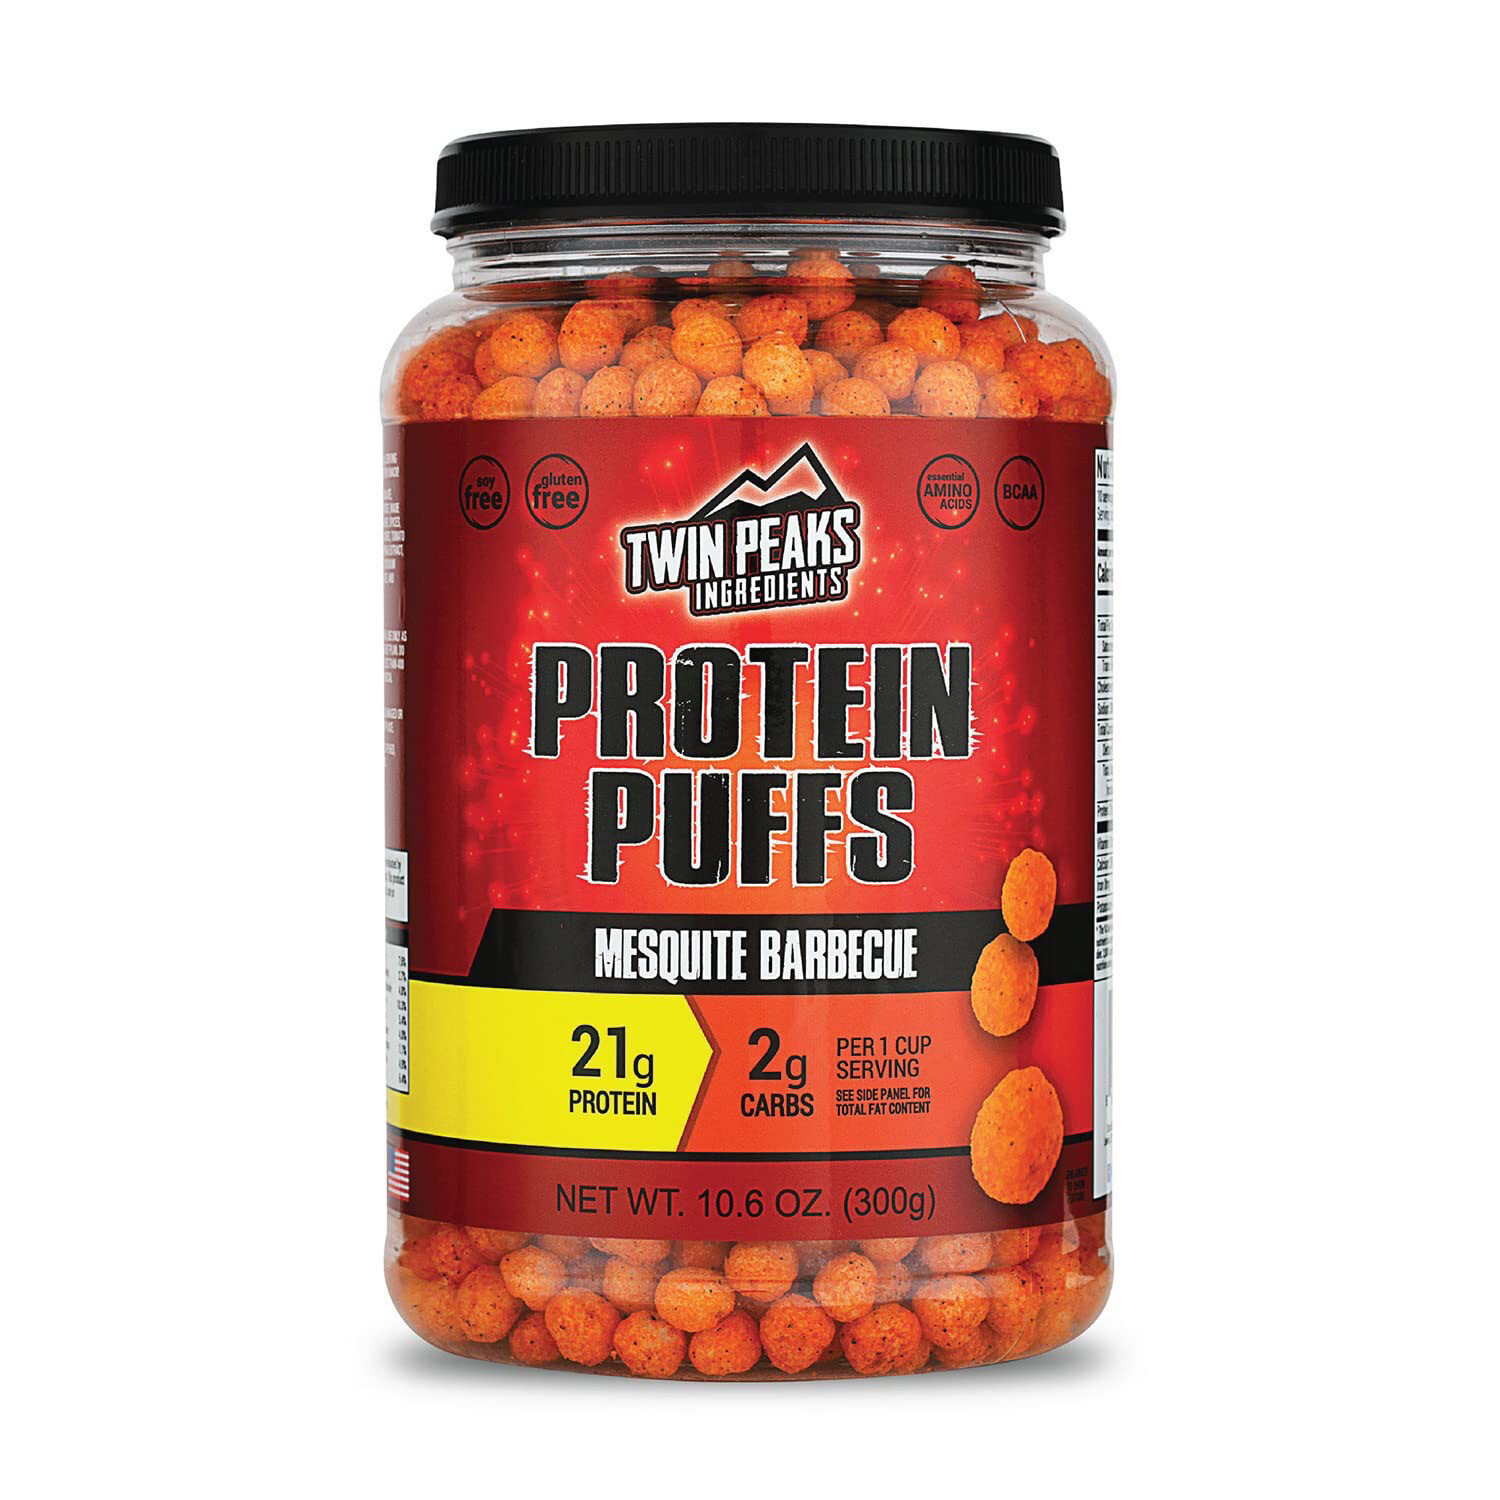 Twin Peaks Protein Puffs Mesquite Barbecue Jar 21g Pro 